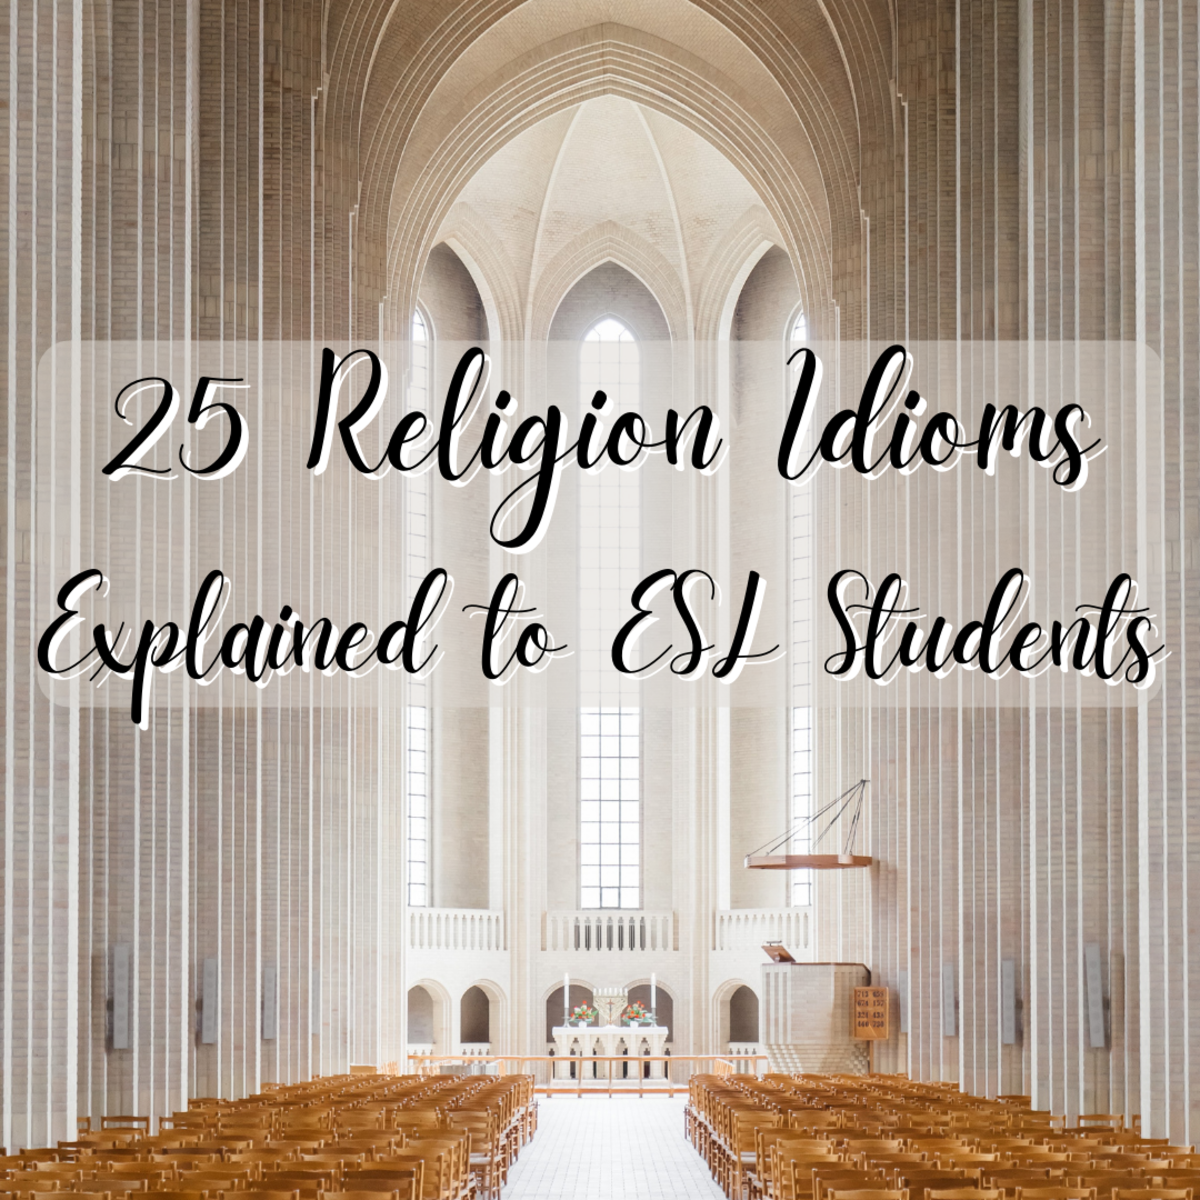 Read on to learn 25 English religious idioms. These idioms about religion will help ESL students better understand conversational English.